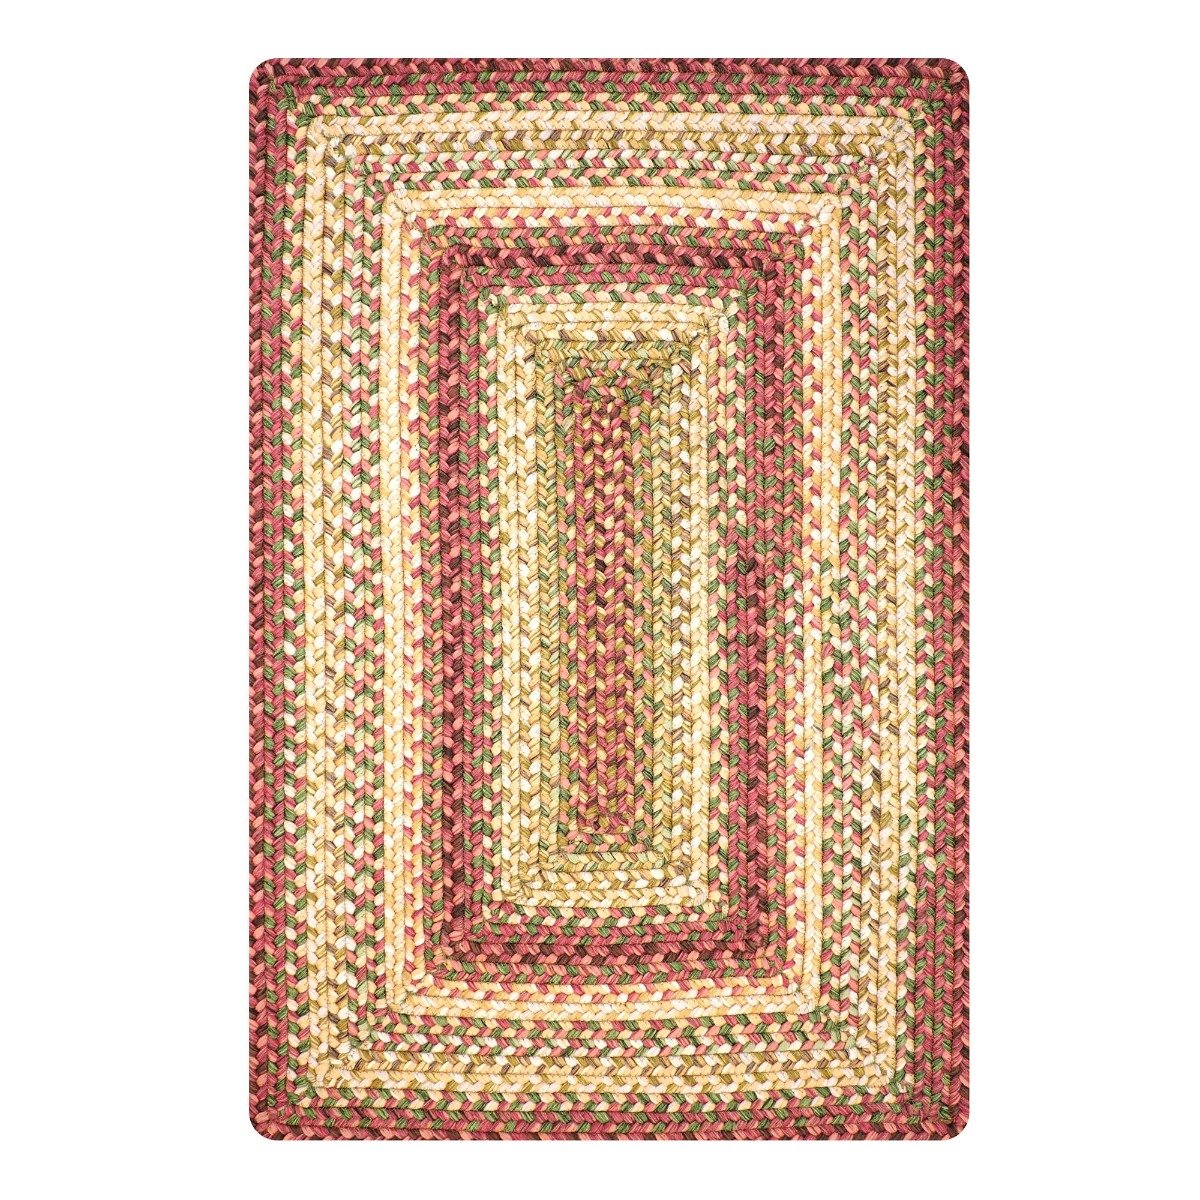 https://cdn.homespice.com/media/catalog/product/b/a/barcelona_red_rectangular_washabl_pet-friendly_braided_rug-silo_8.jpg?width=1500&height=1500&store=retail&image-type=image